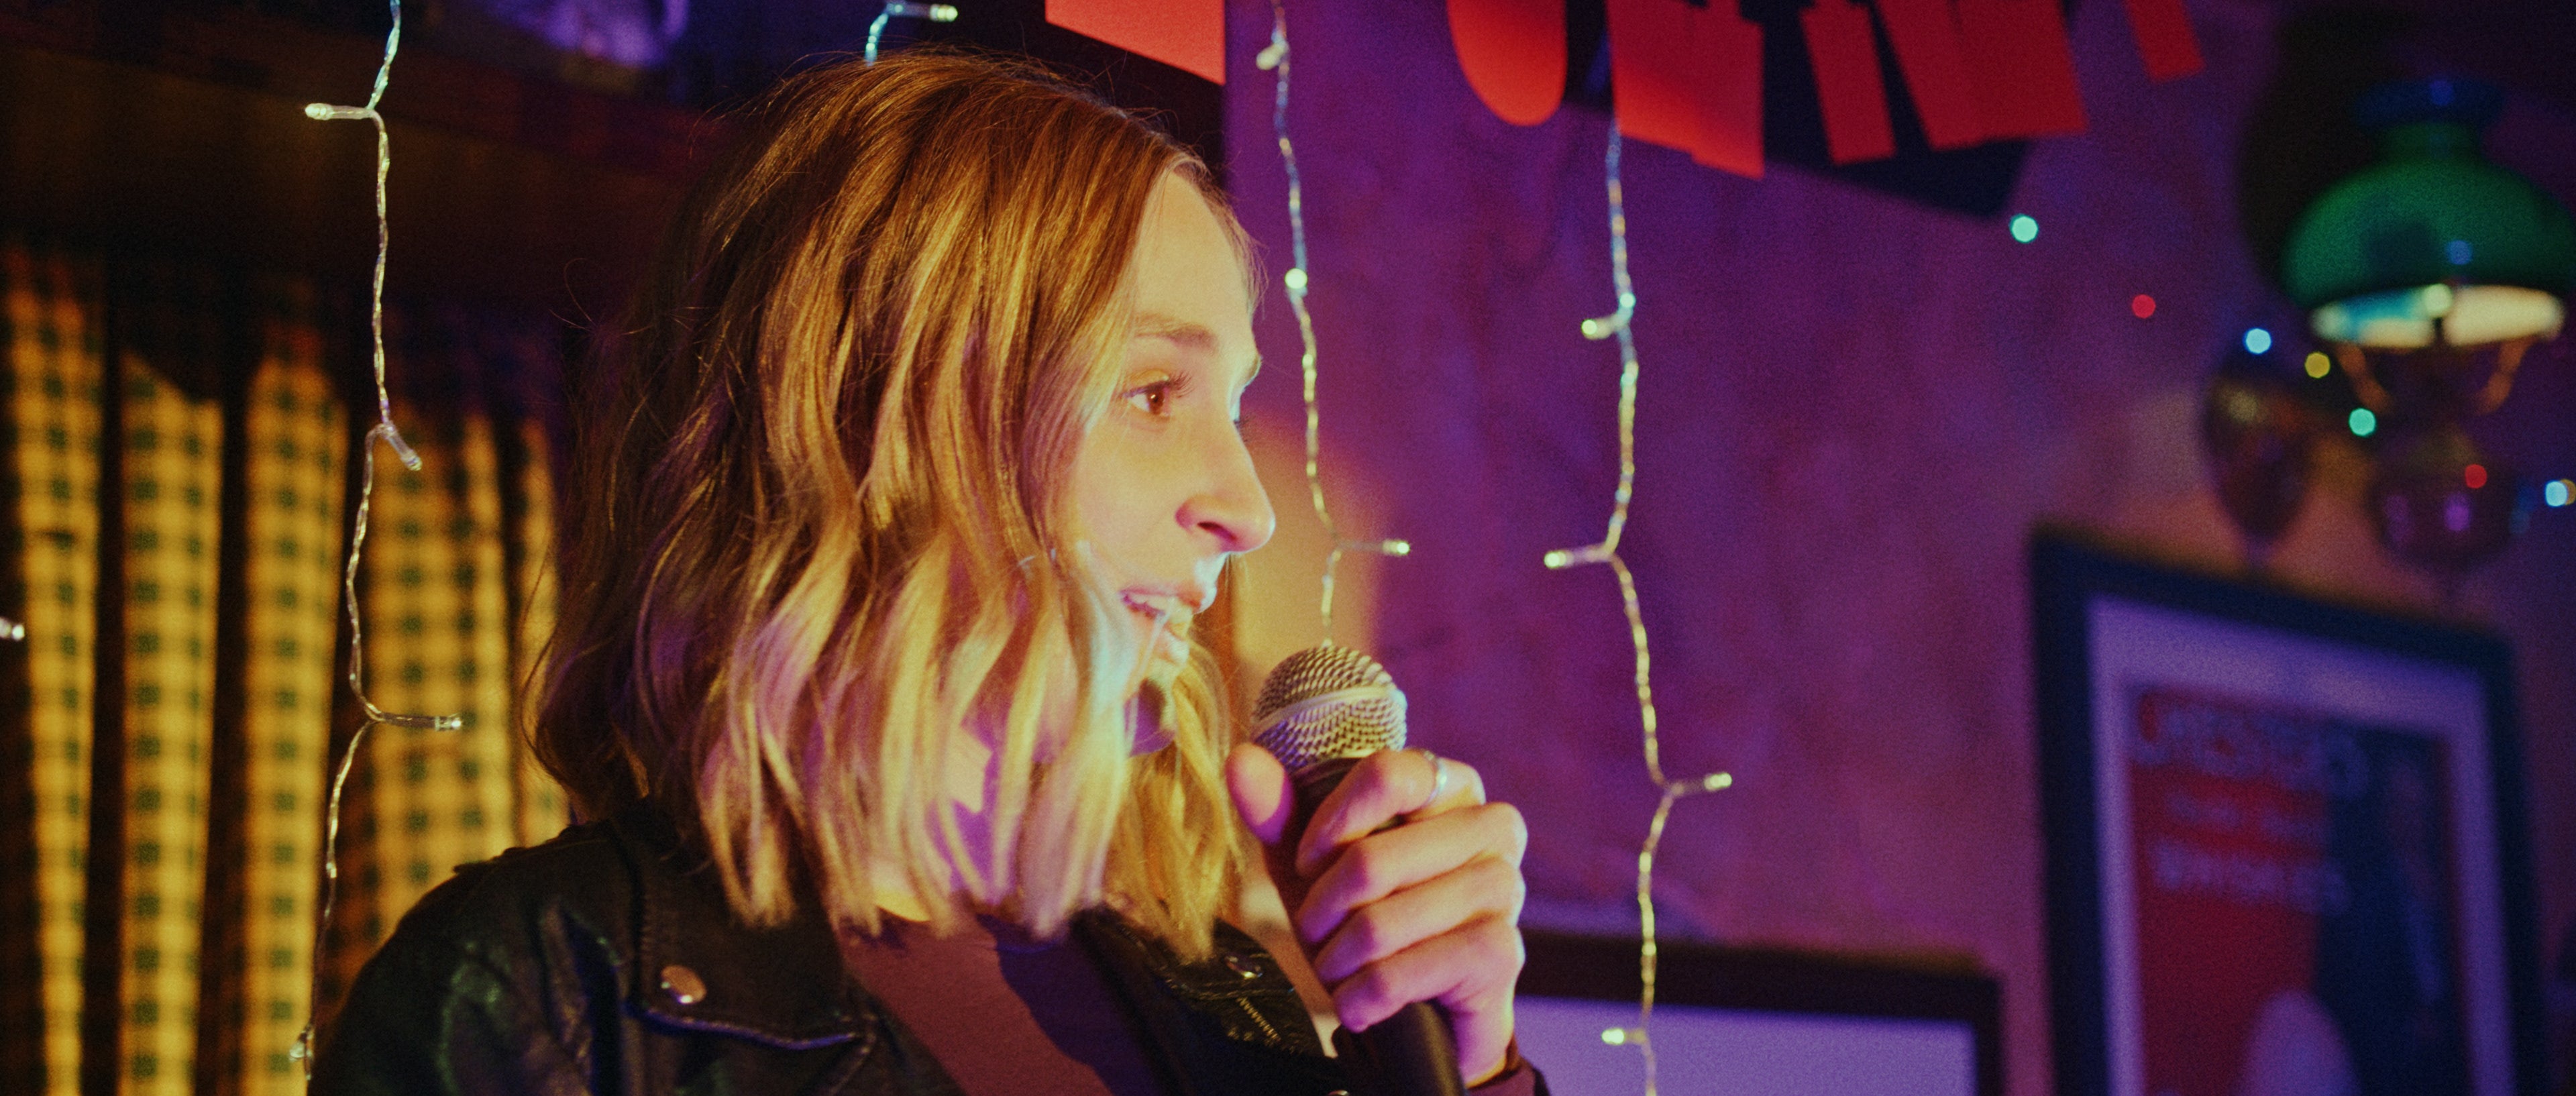 A still from Will Schneider's Goodbye Janet - a young woman grips a microphone while in the spotlight of a karaoke bar